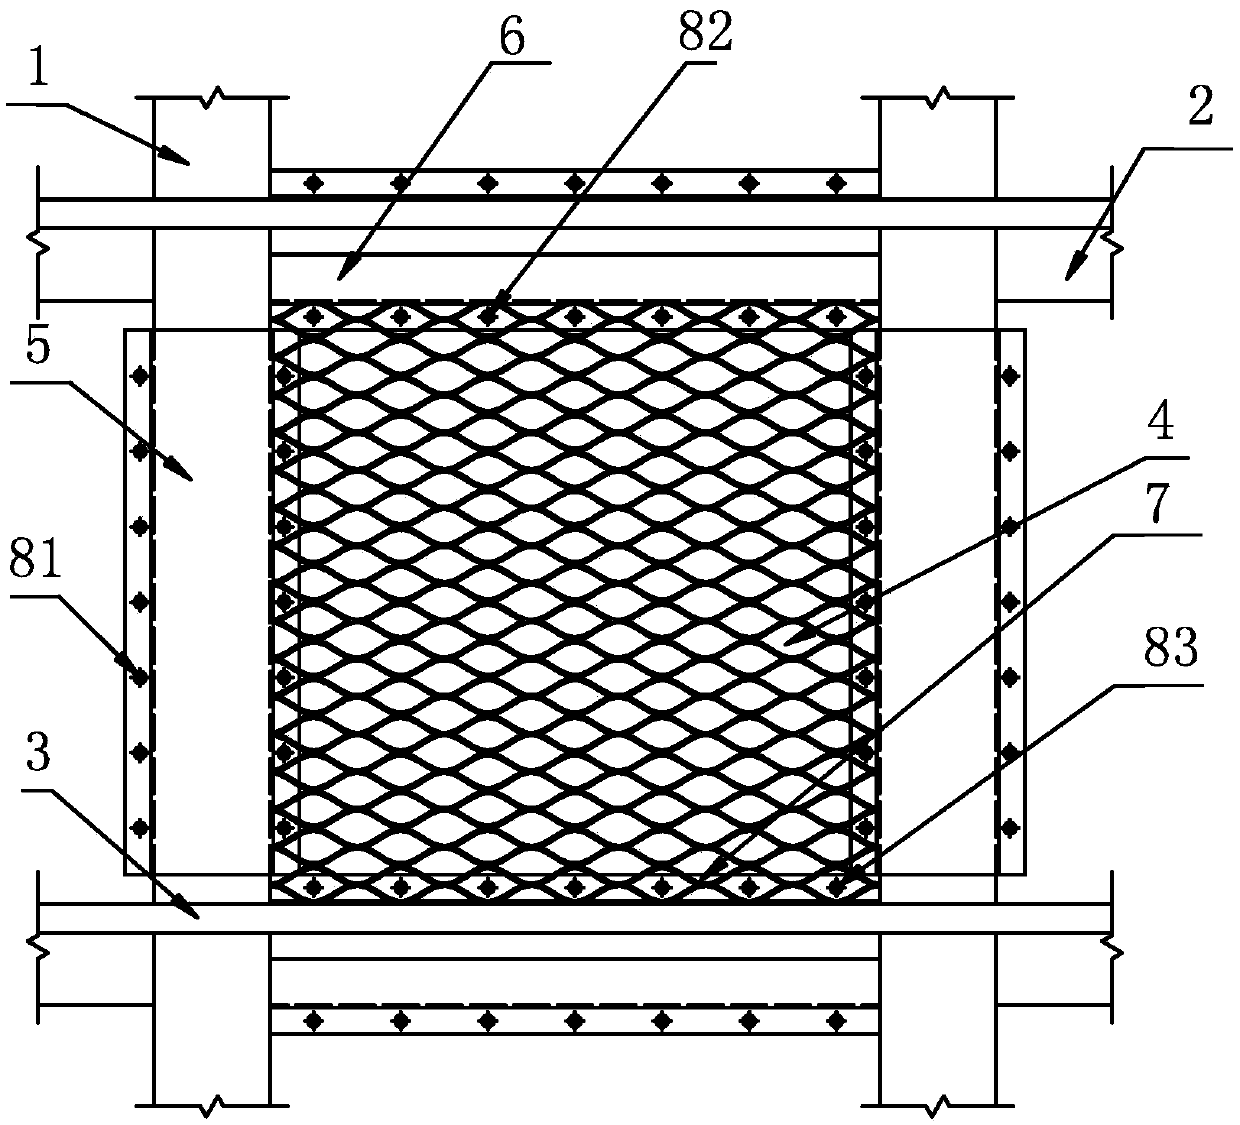 A Concrete Frame Seismic Reinforcement Structure Using Steel Mesh